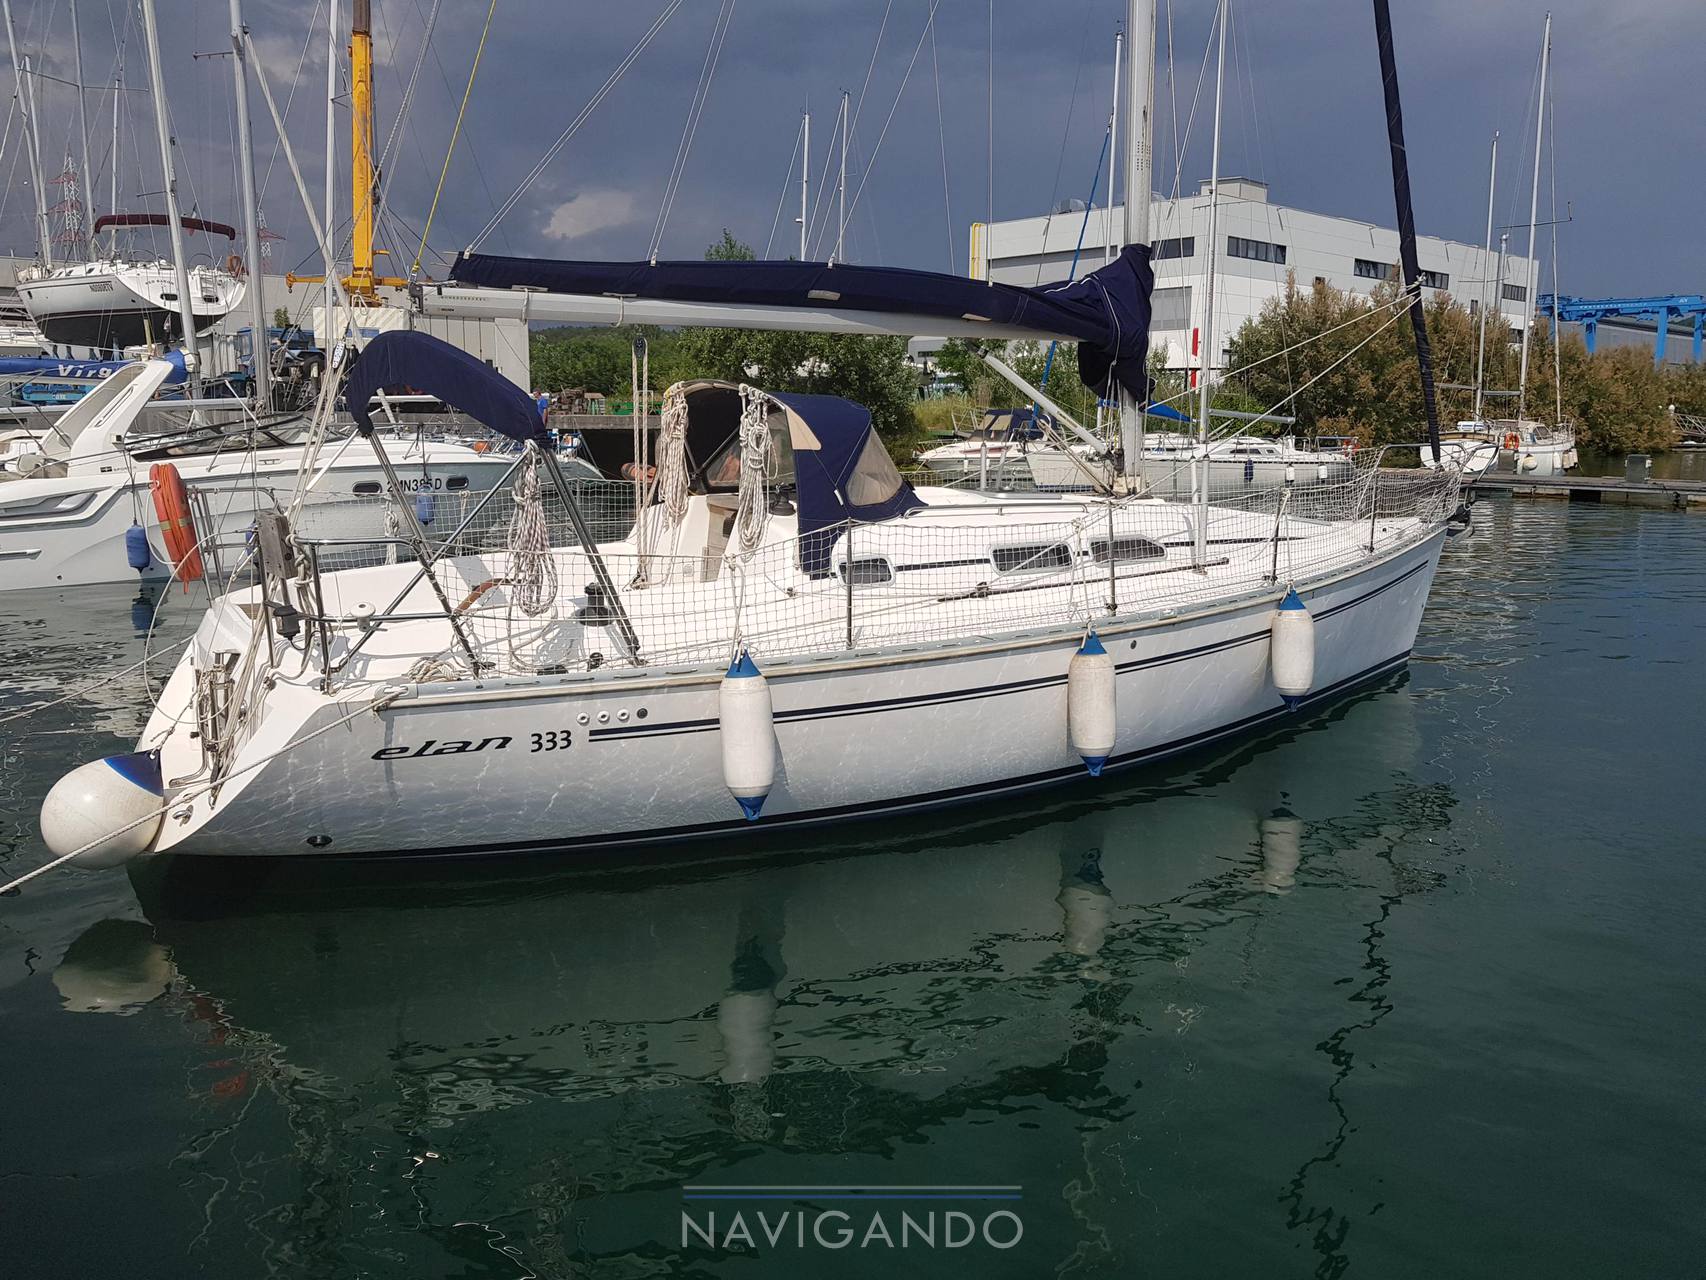 Elan 333 Sailing boat used for sale